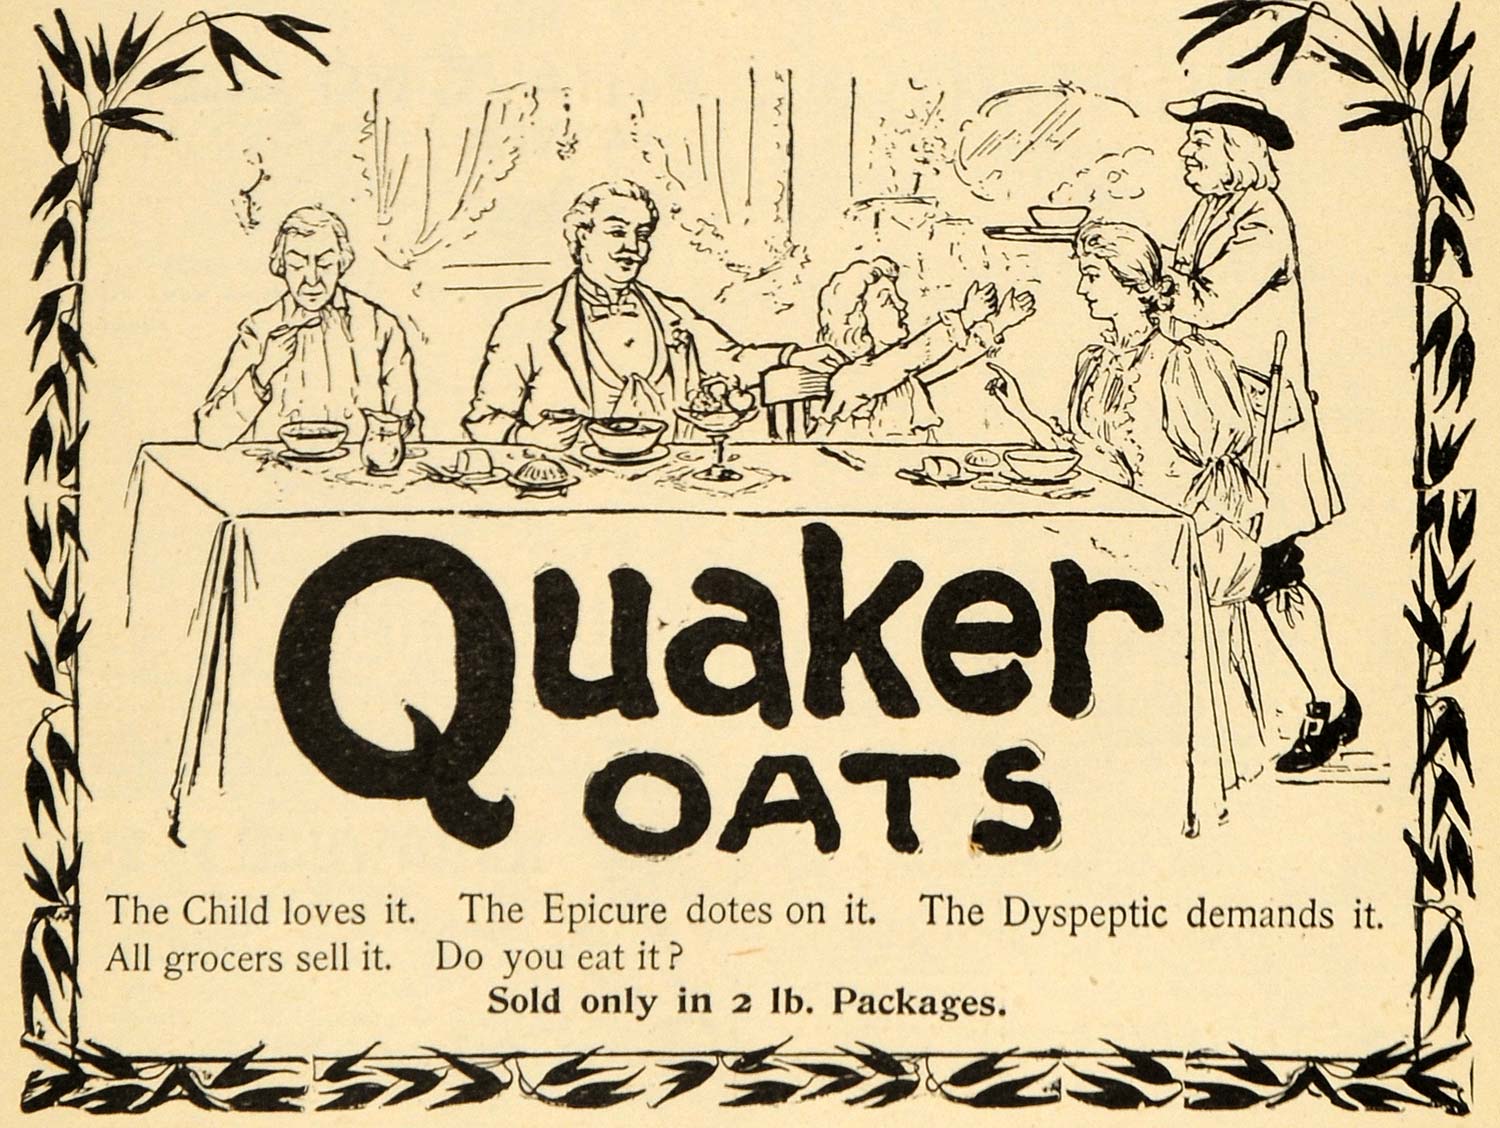 1895 Ad Quaker Oats Cereal Family Meal Time Dine Table - ORIGINAL TFO1